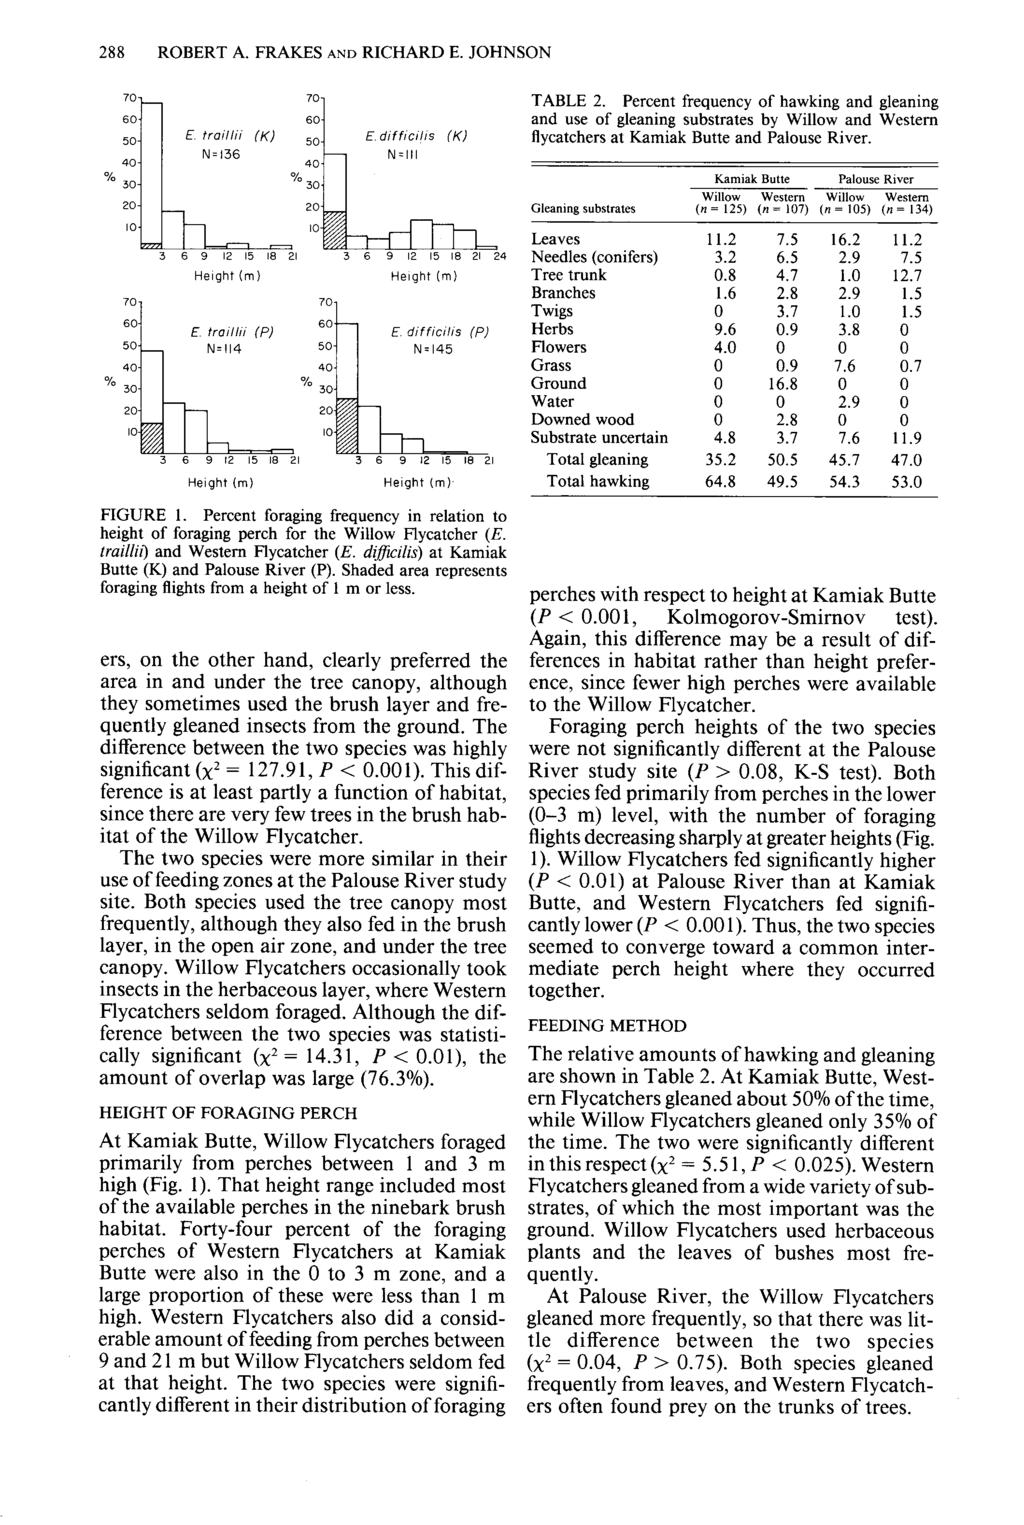 288 ROBERT A. FRAKES AND RICHARD E. JOHNSON TABLE 2. Percent frequency of hawking and gleaning and use of gleaning substrates by and flycatchers at Kamiak Butte and Palouse River.